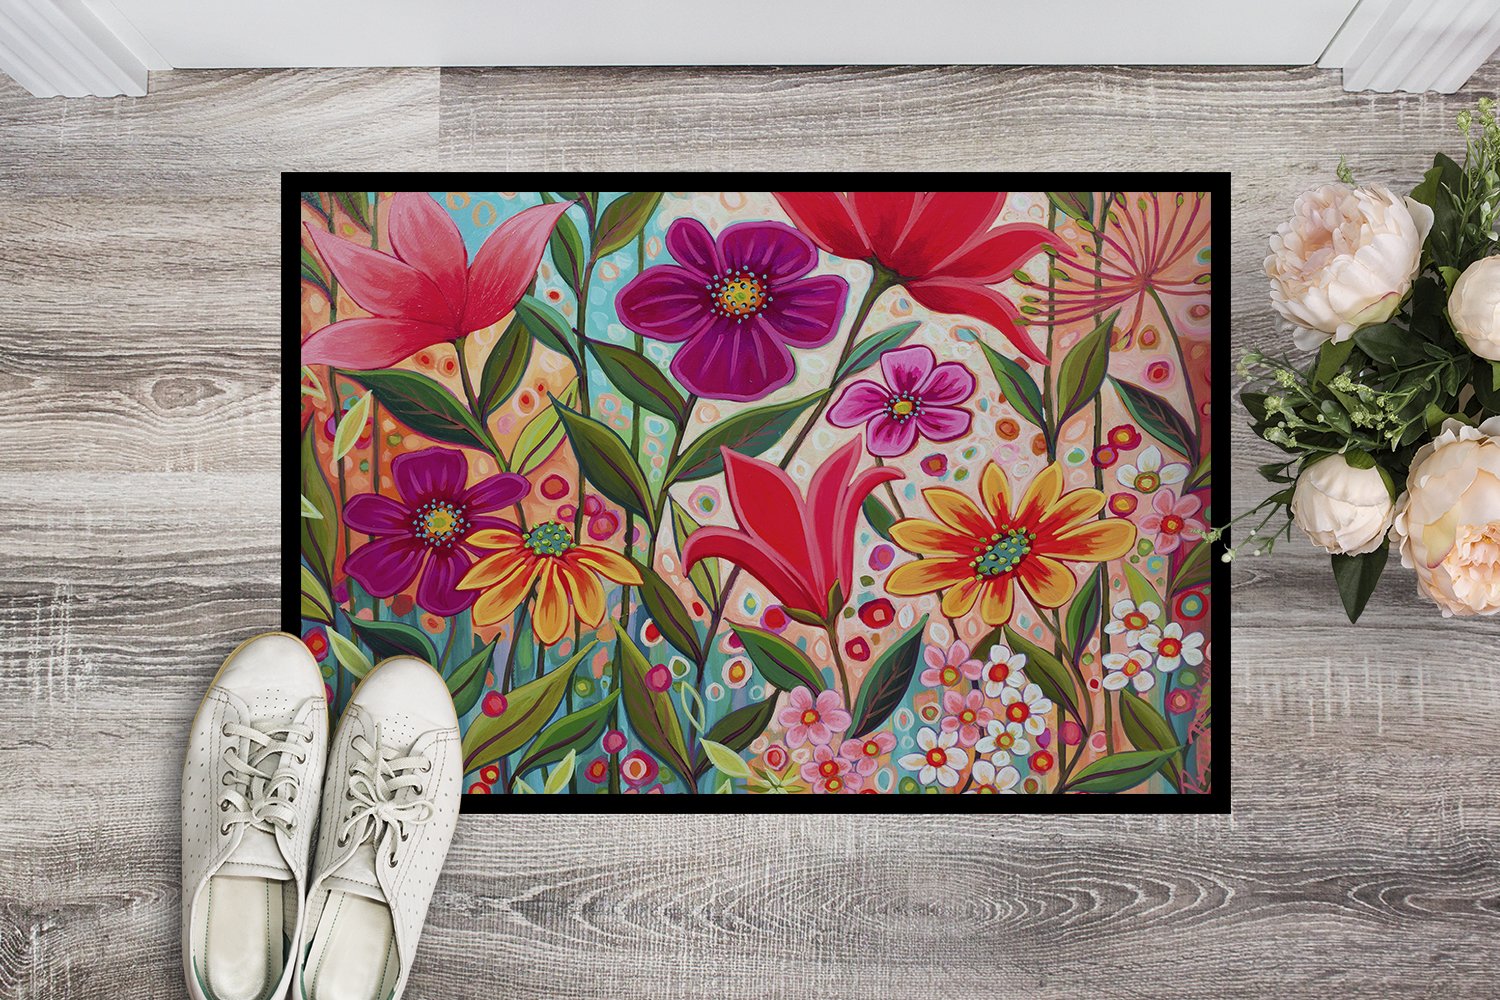 Fanciful Flowers Indoor or Outdoor Mat 24x36 PPD3015JMAT by Caroline's Treasures